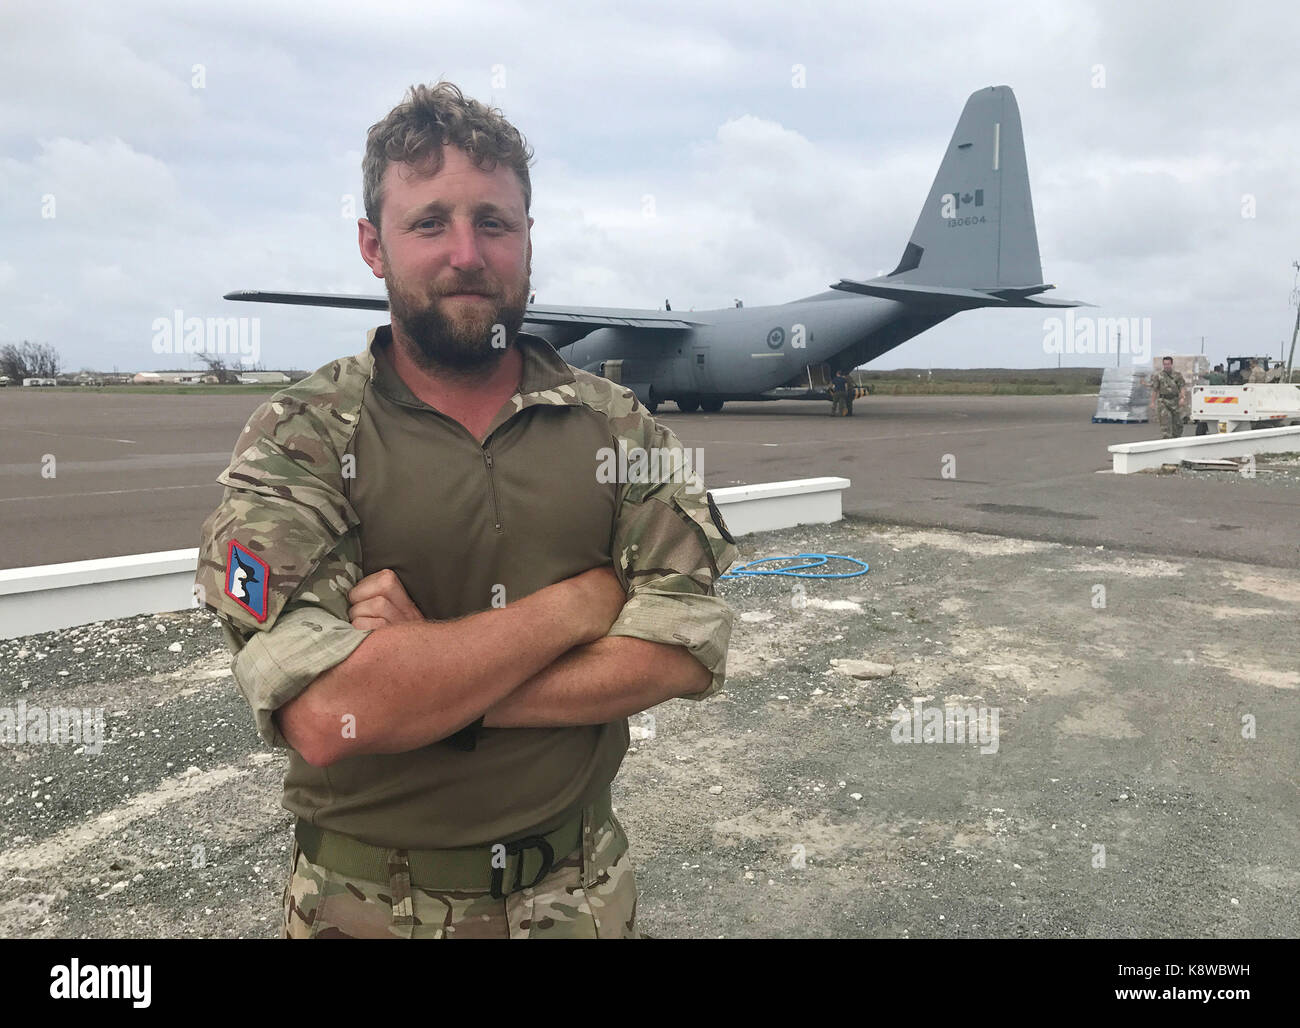 Royal Navy Lieutenant Stephen Dunning stands in front of a Royal Canadian Air Force Hercules aircraft. A final aid drop has landed on a British overseas territory ahead of Hurricane Maria's arrival, as residents stress a second storm is the last thing they need. Stock Photo